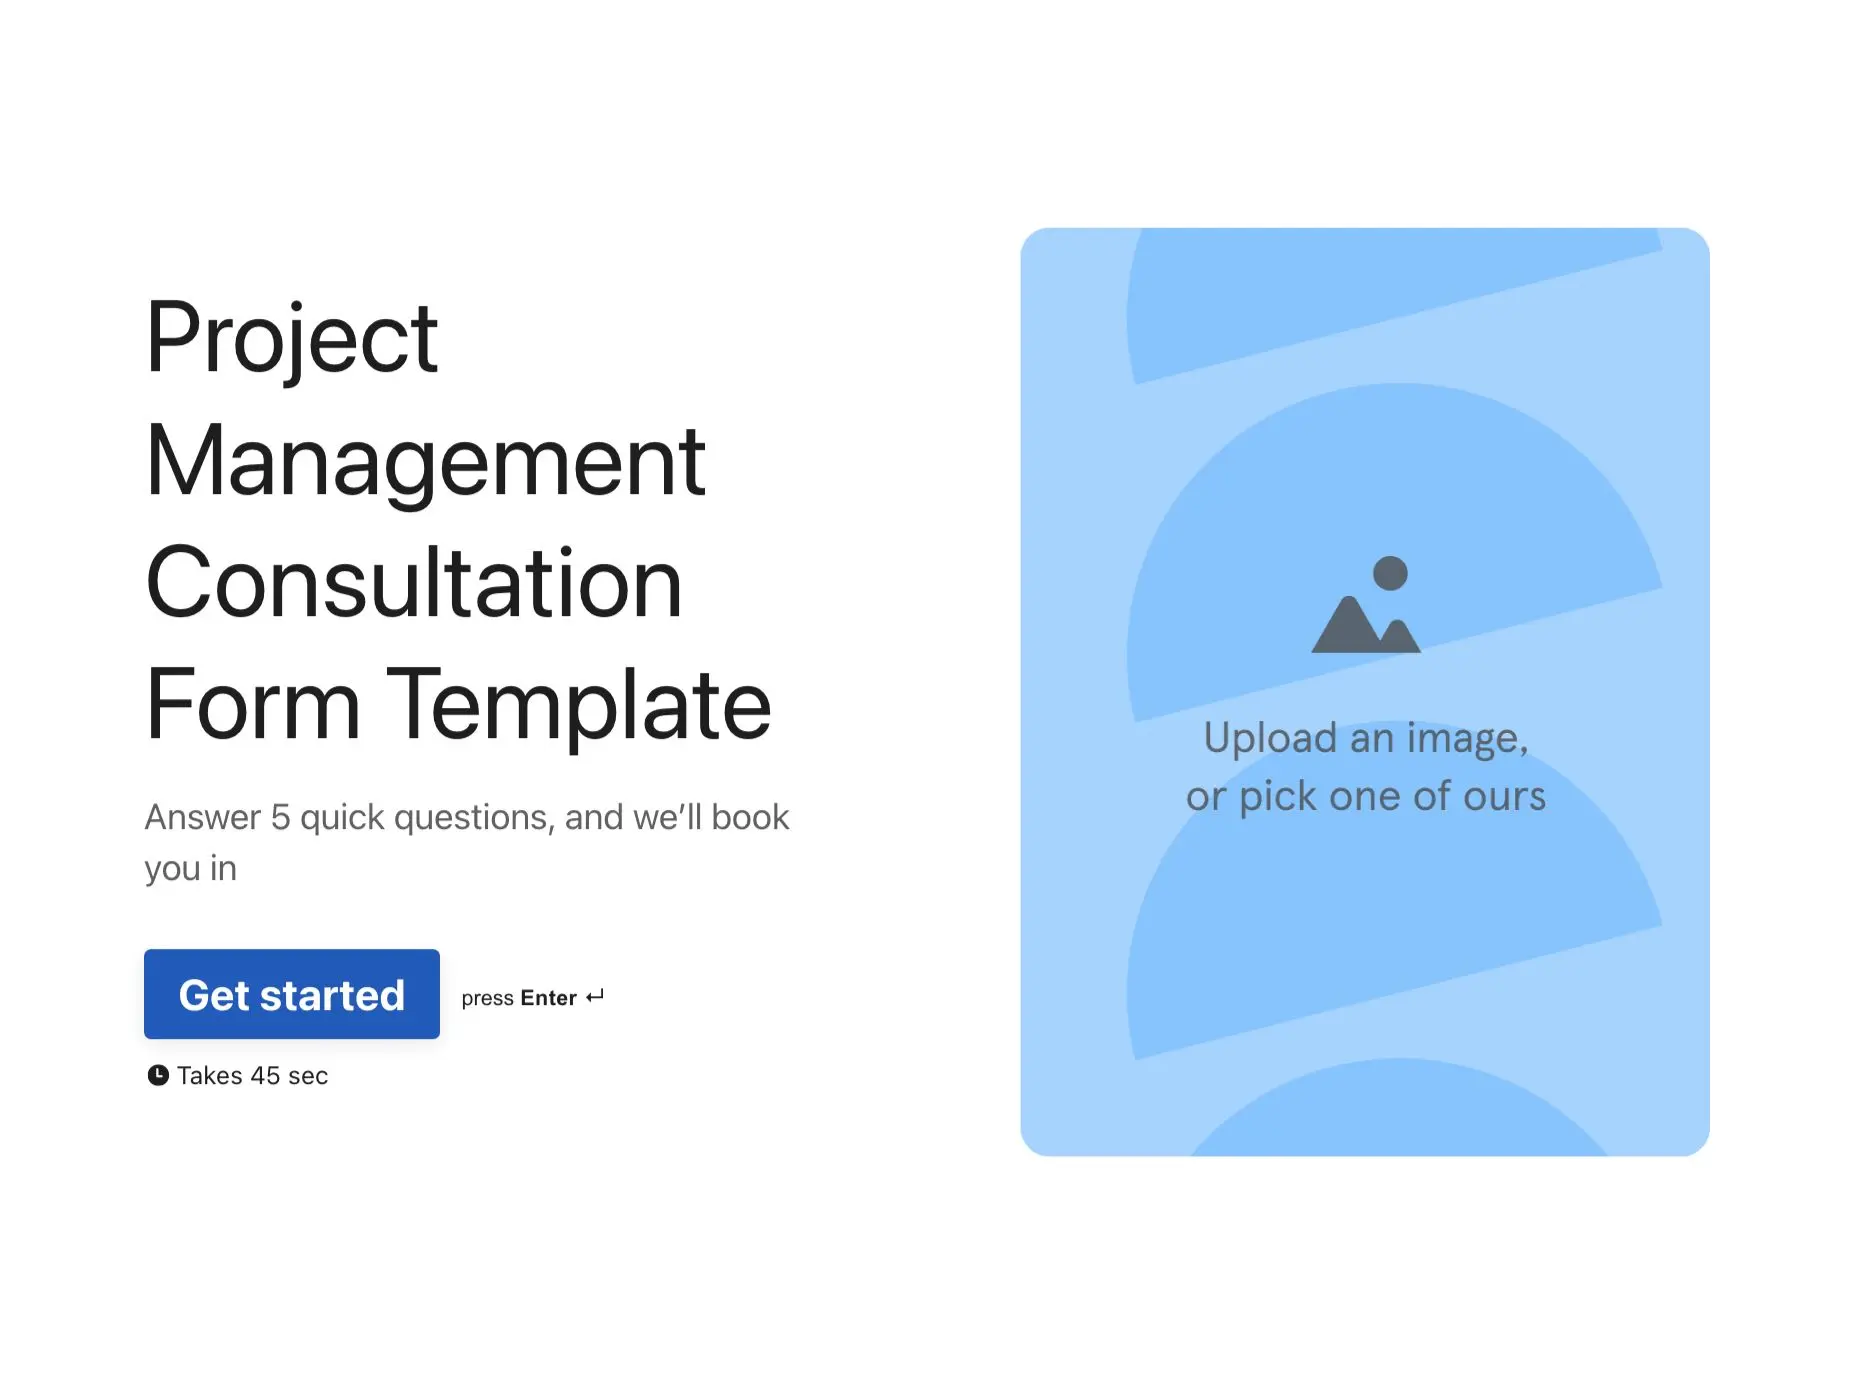 Project Management Consultation Form Template Hero